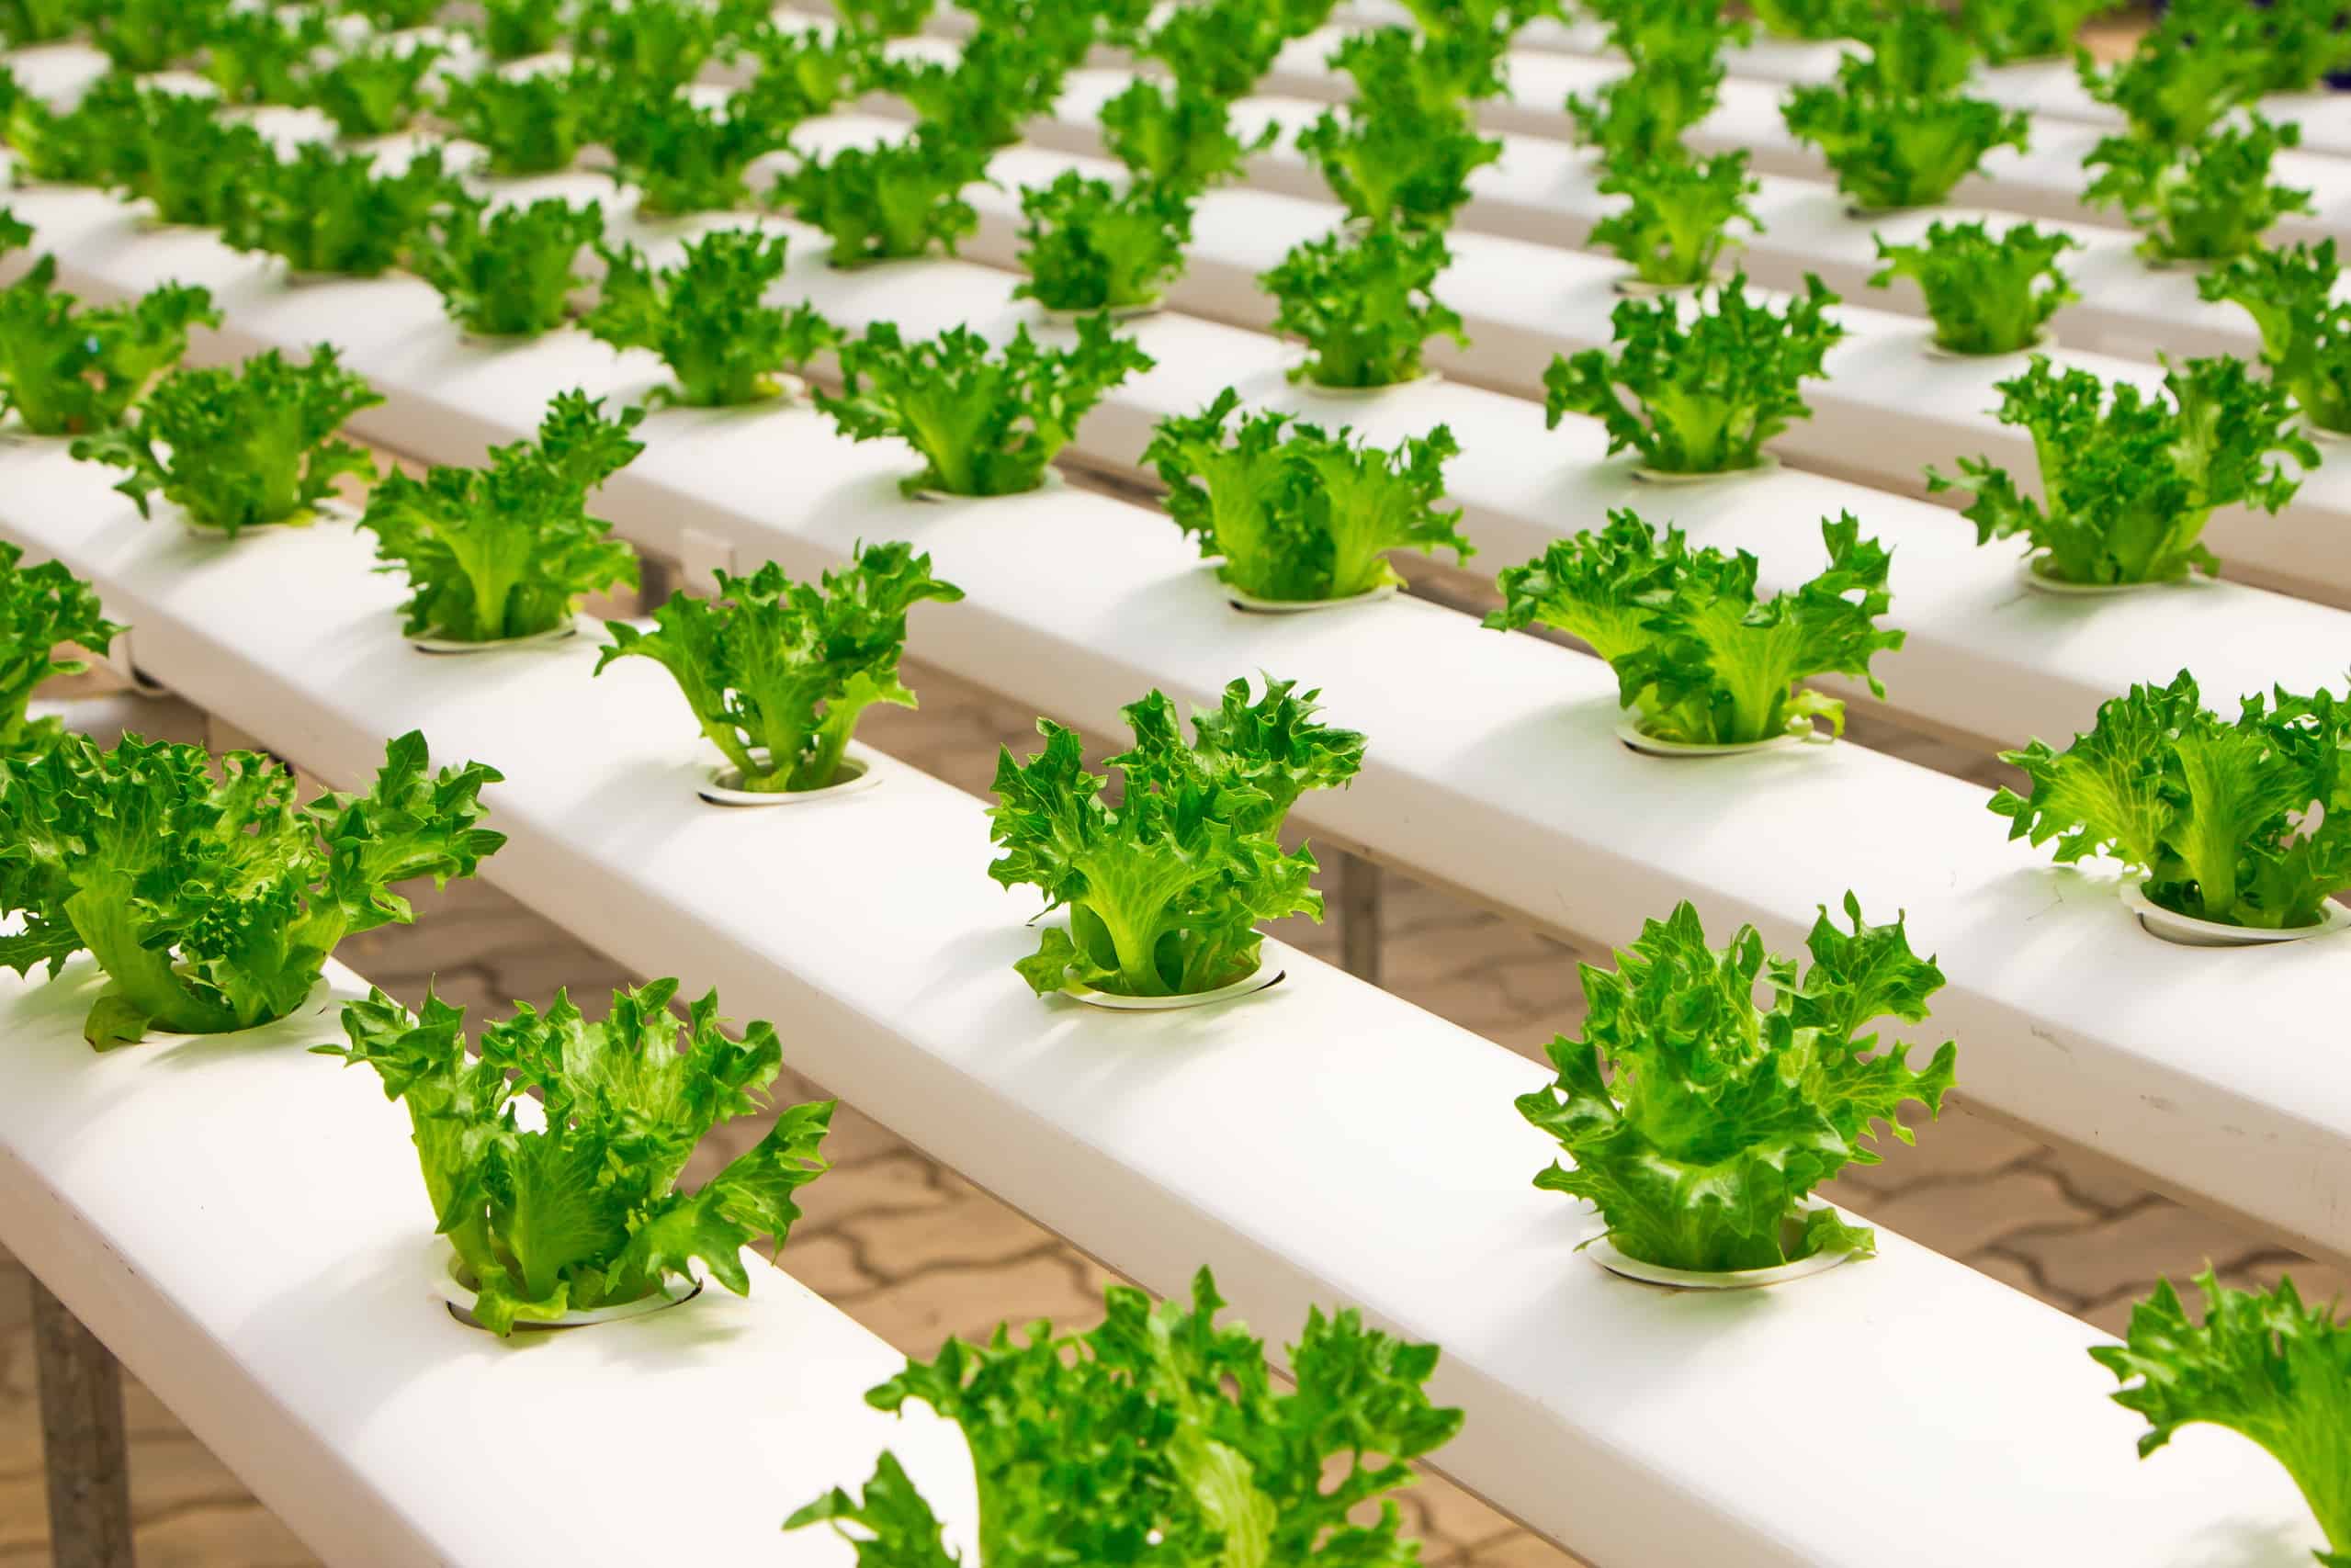 soilless farm plants - Your Next Salad Could Be Grown Just For You: Custom-grown, Soilless Greens Are Coming